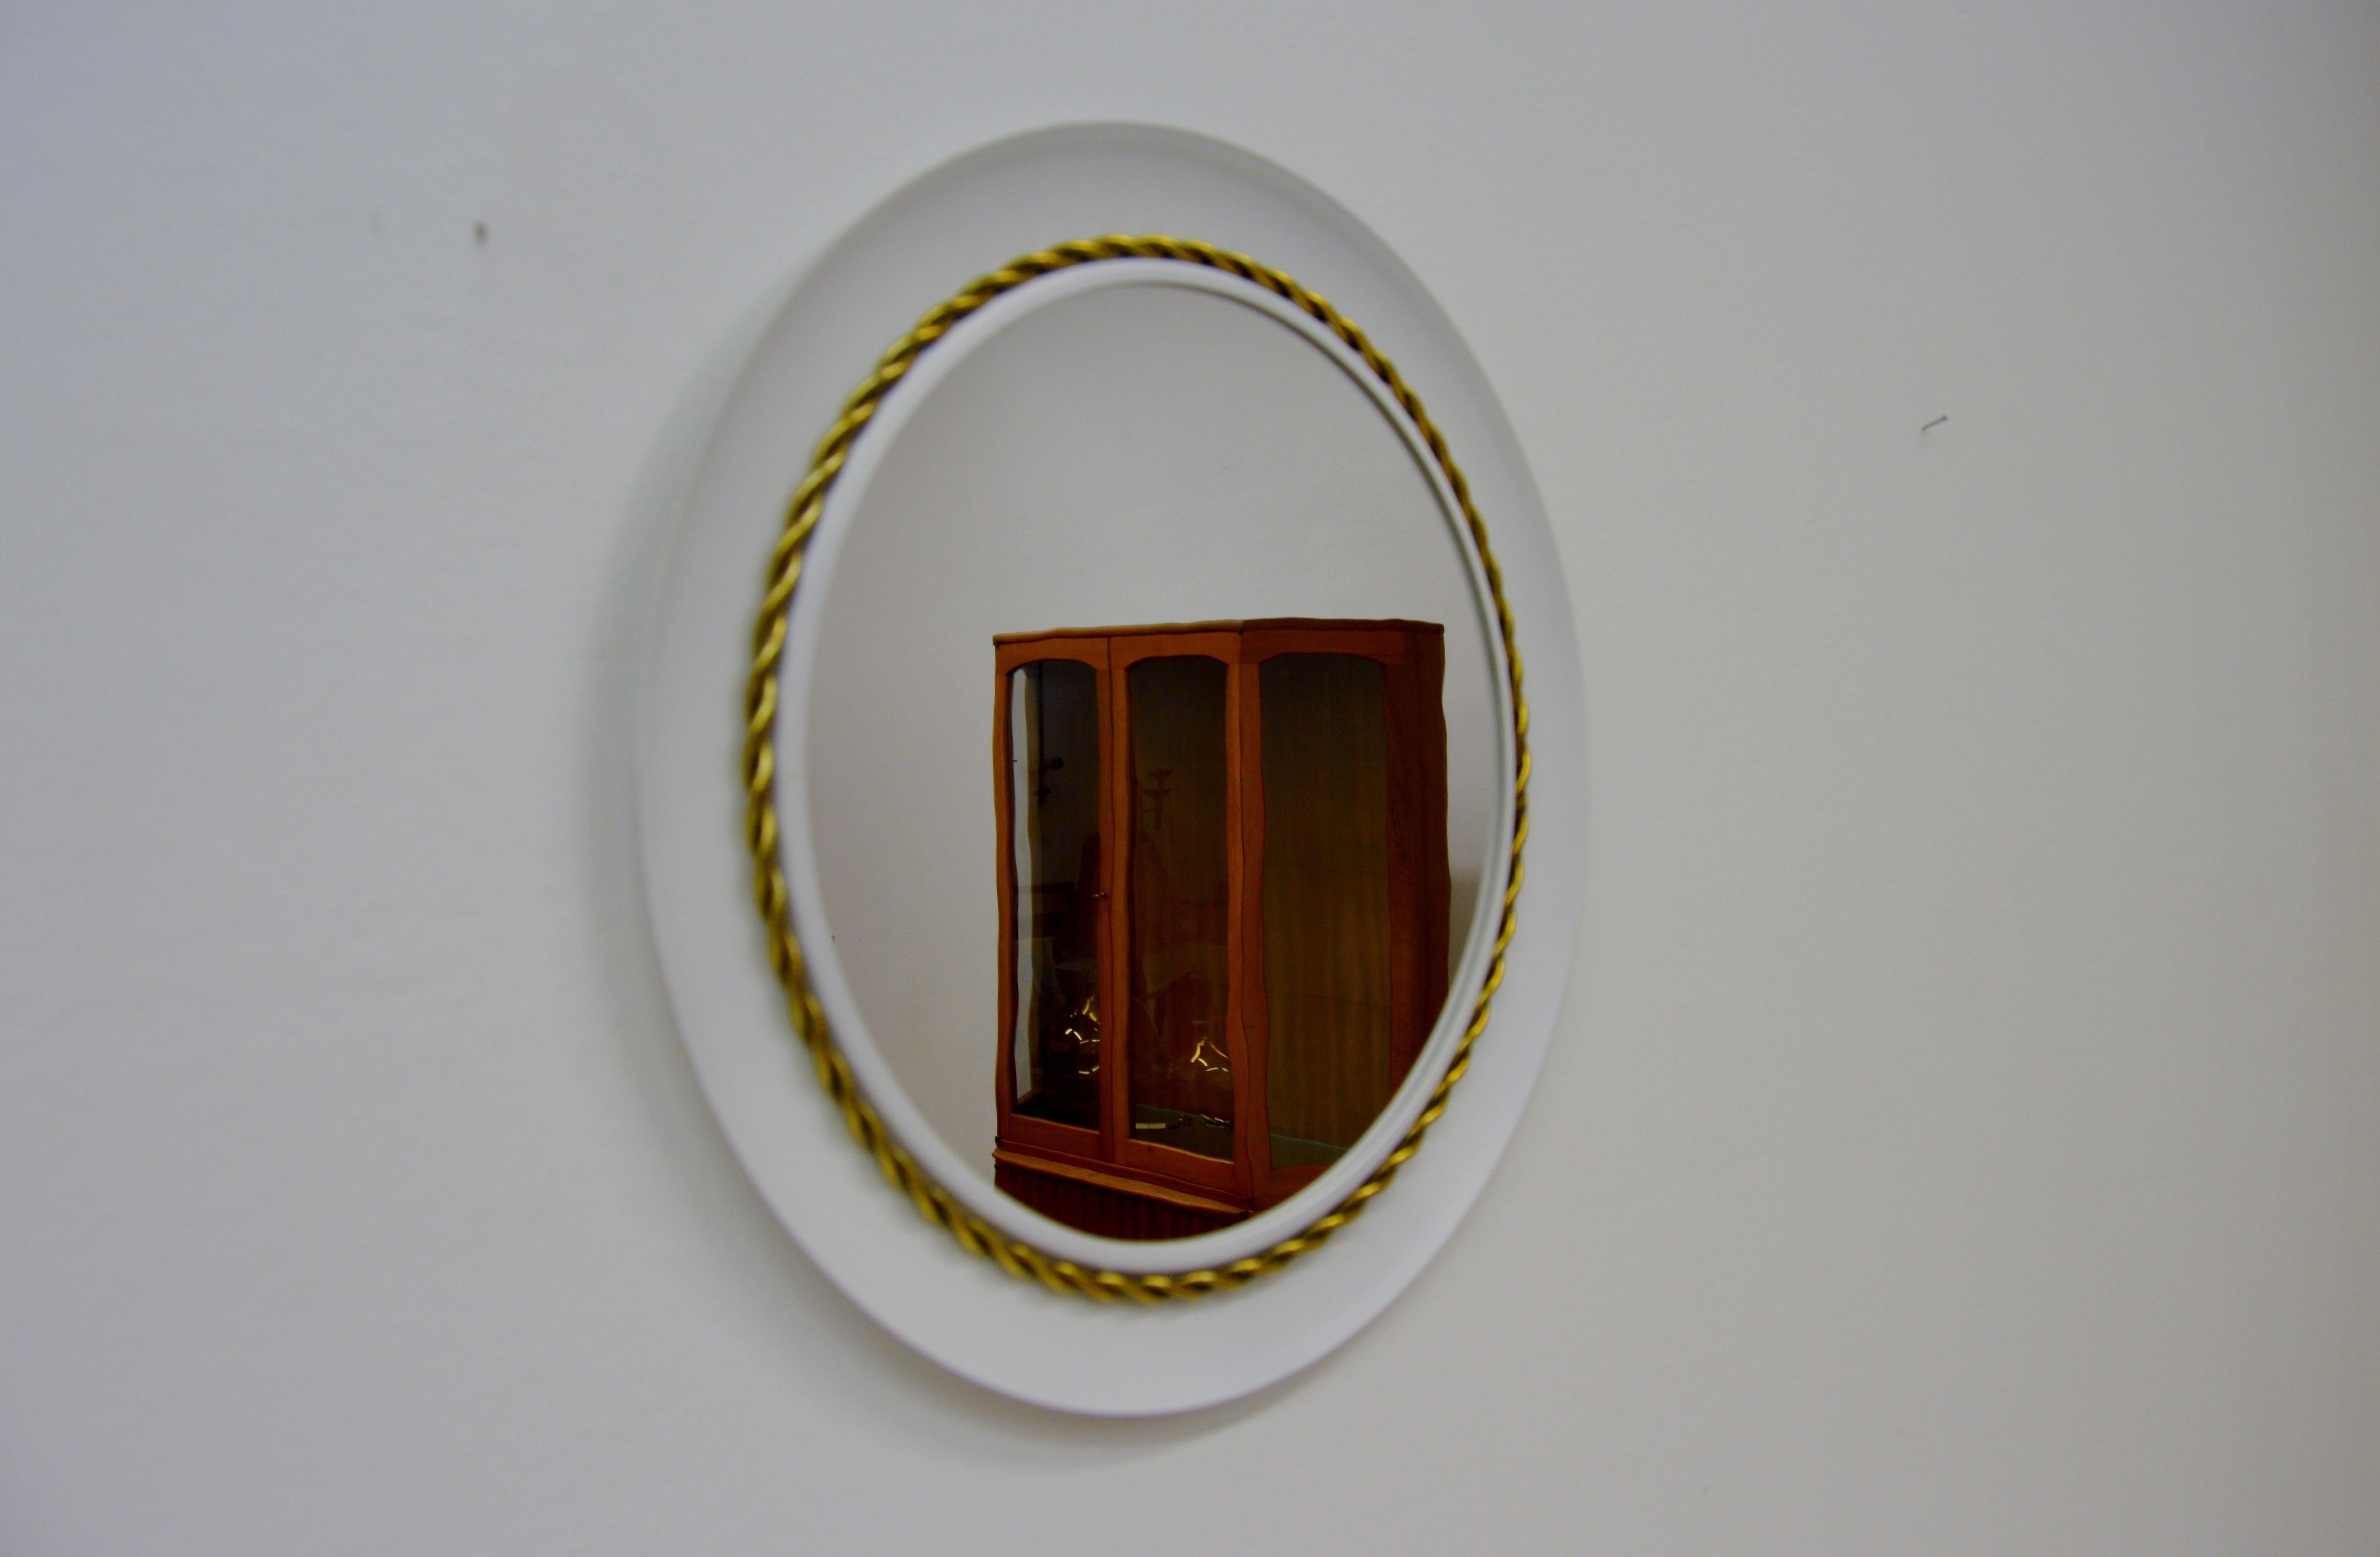 Circular white metal mirror with brass decor.
Designed by Hans-Agne Jakobsson, Markaryd Sweden.